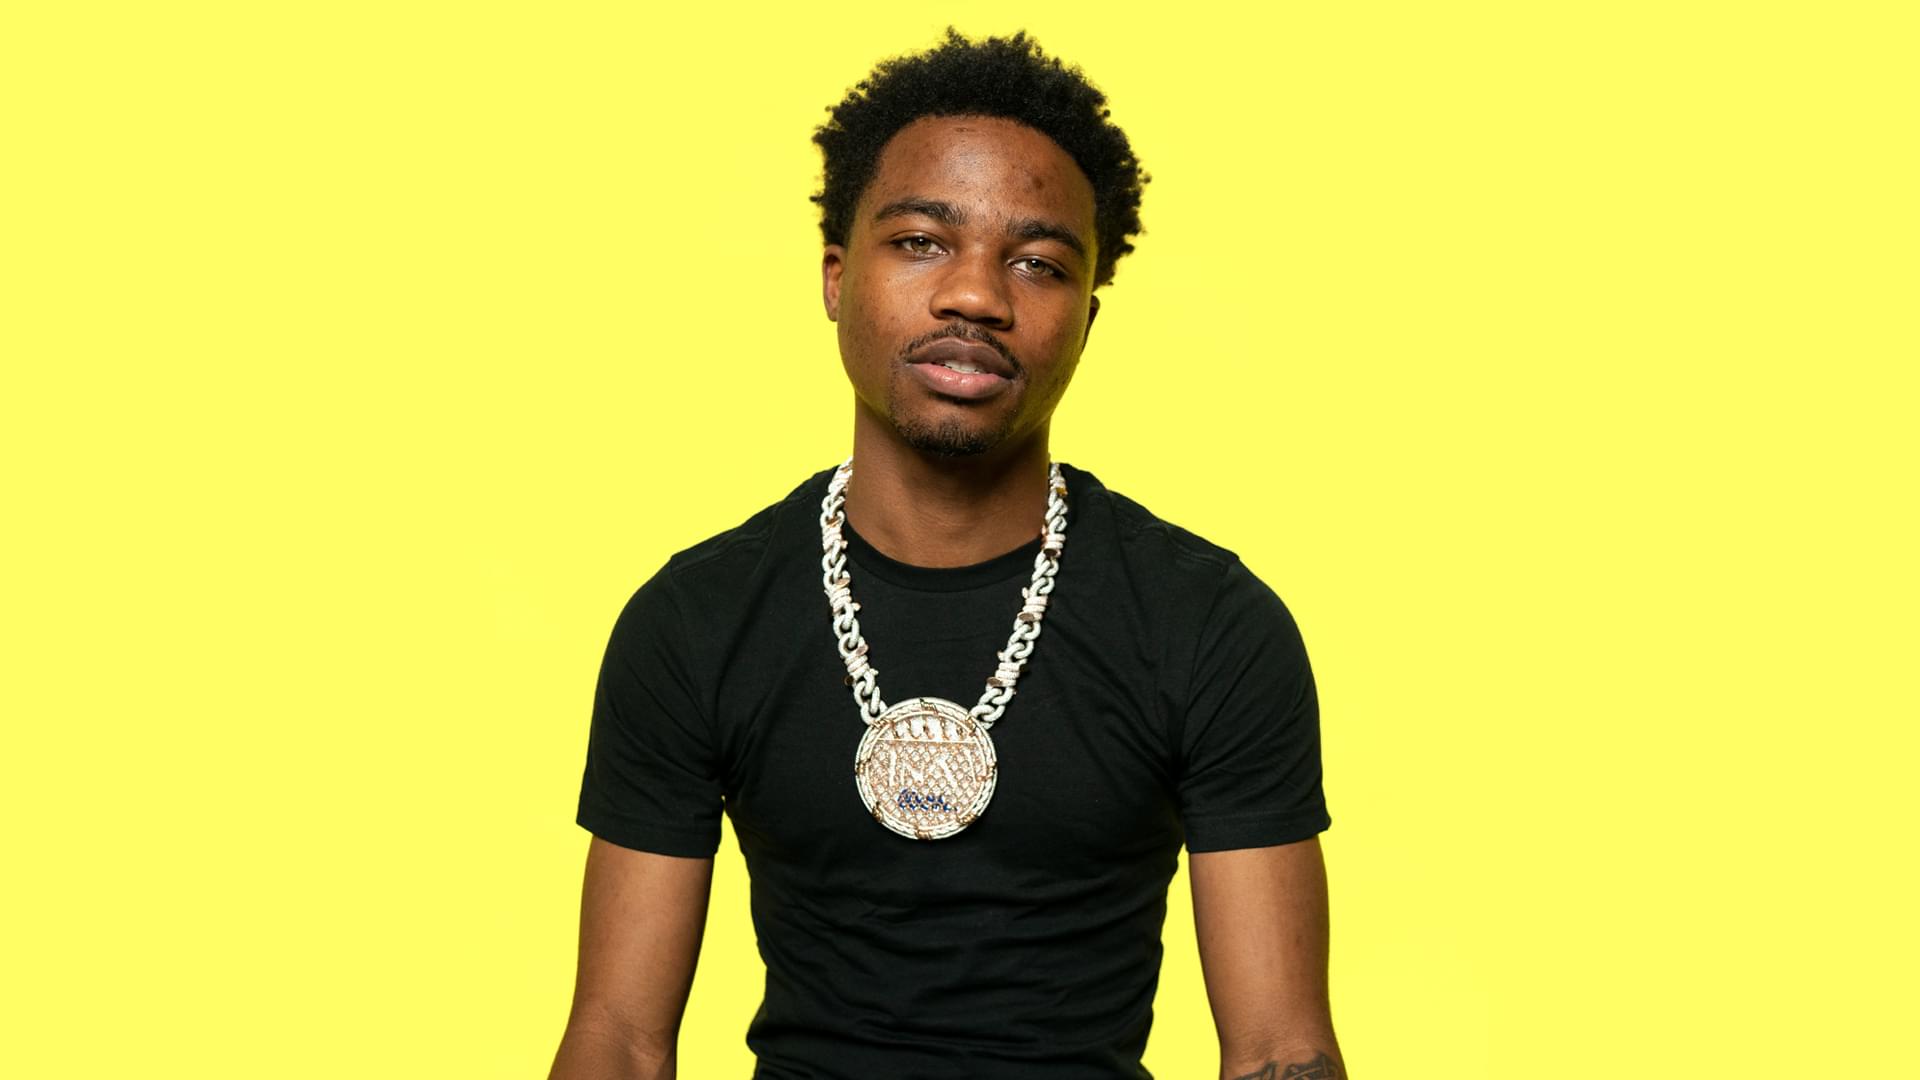 Read All The Lyrics To Roddy Ricch's Debut Album 'Please